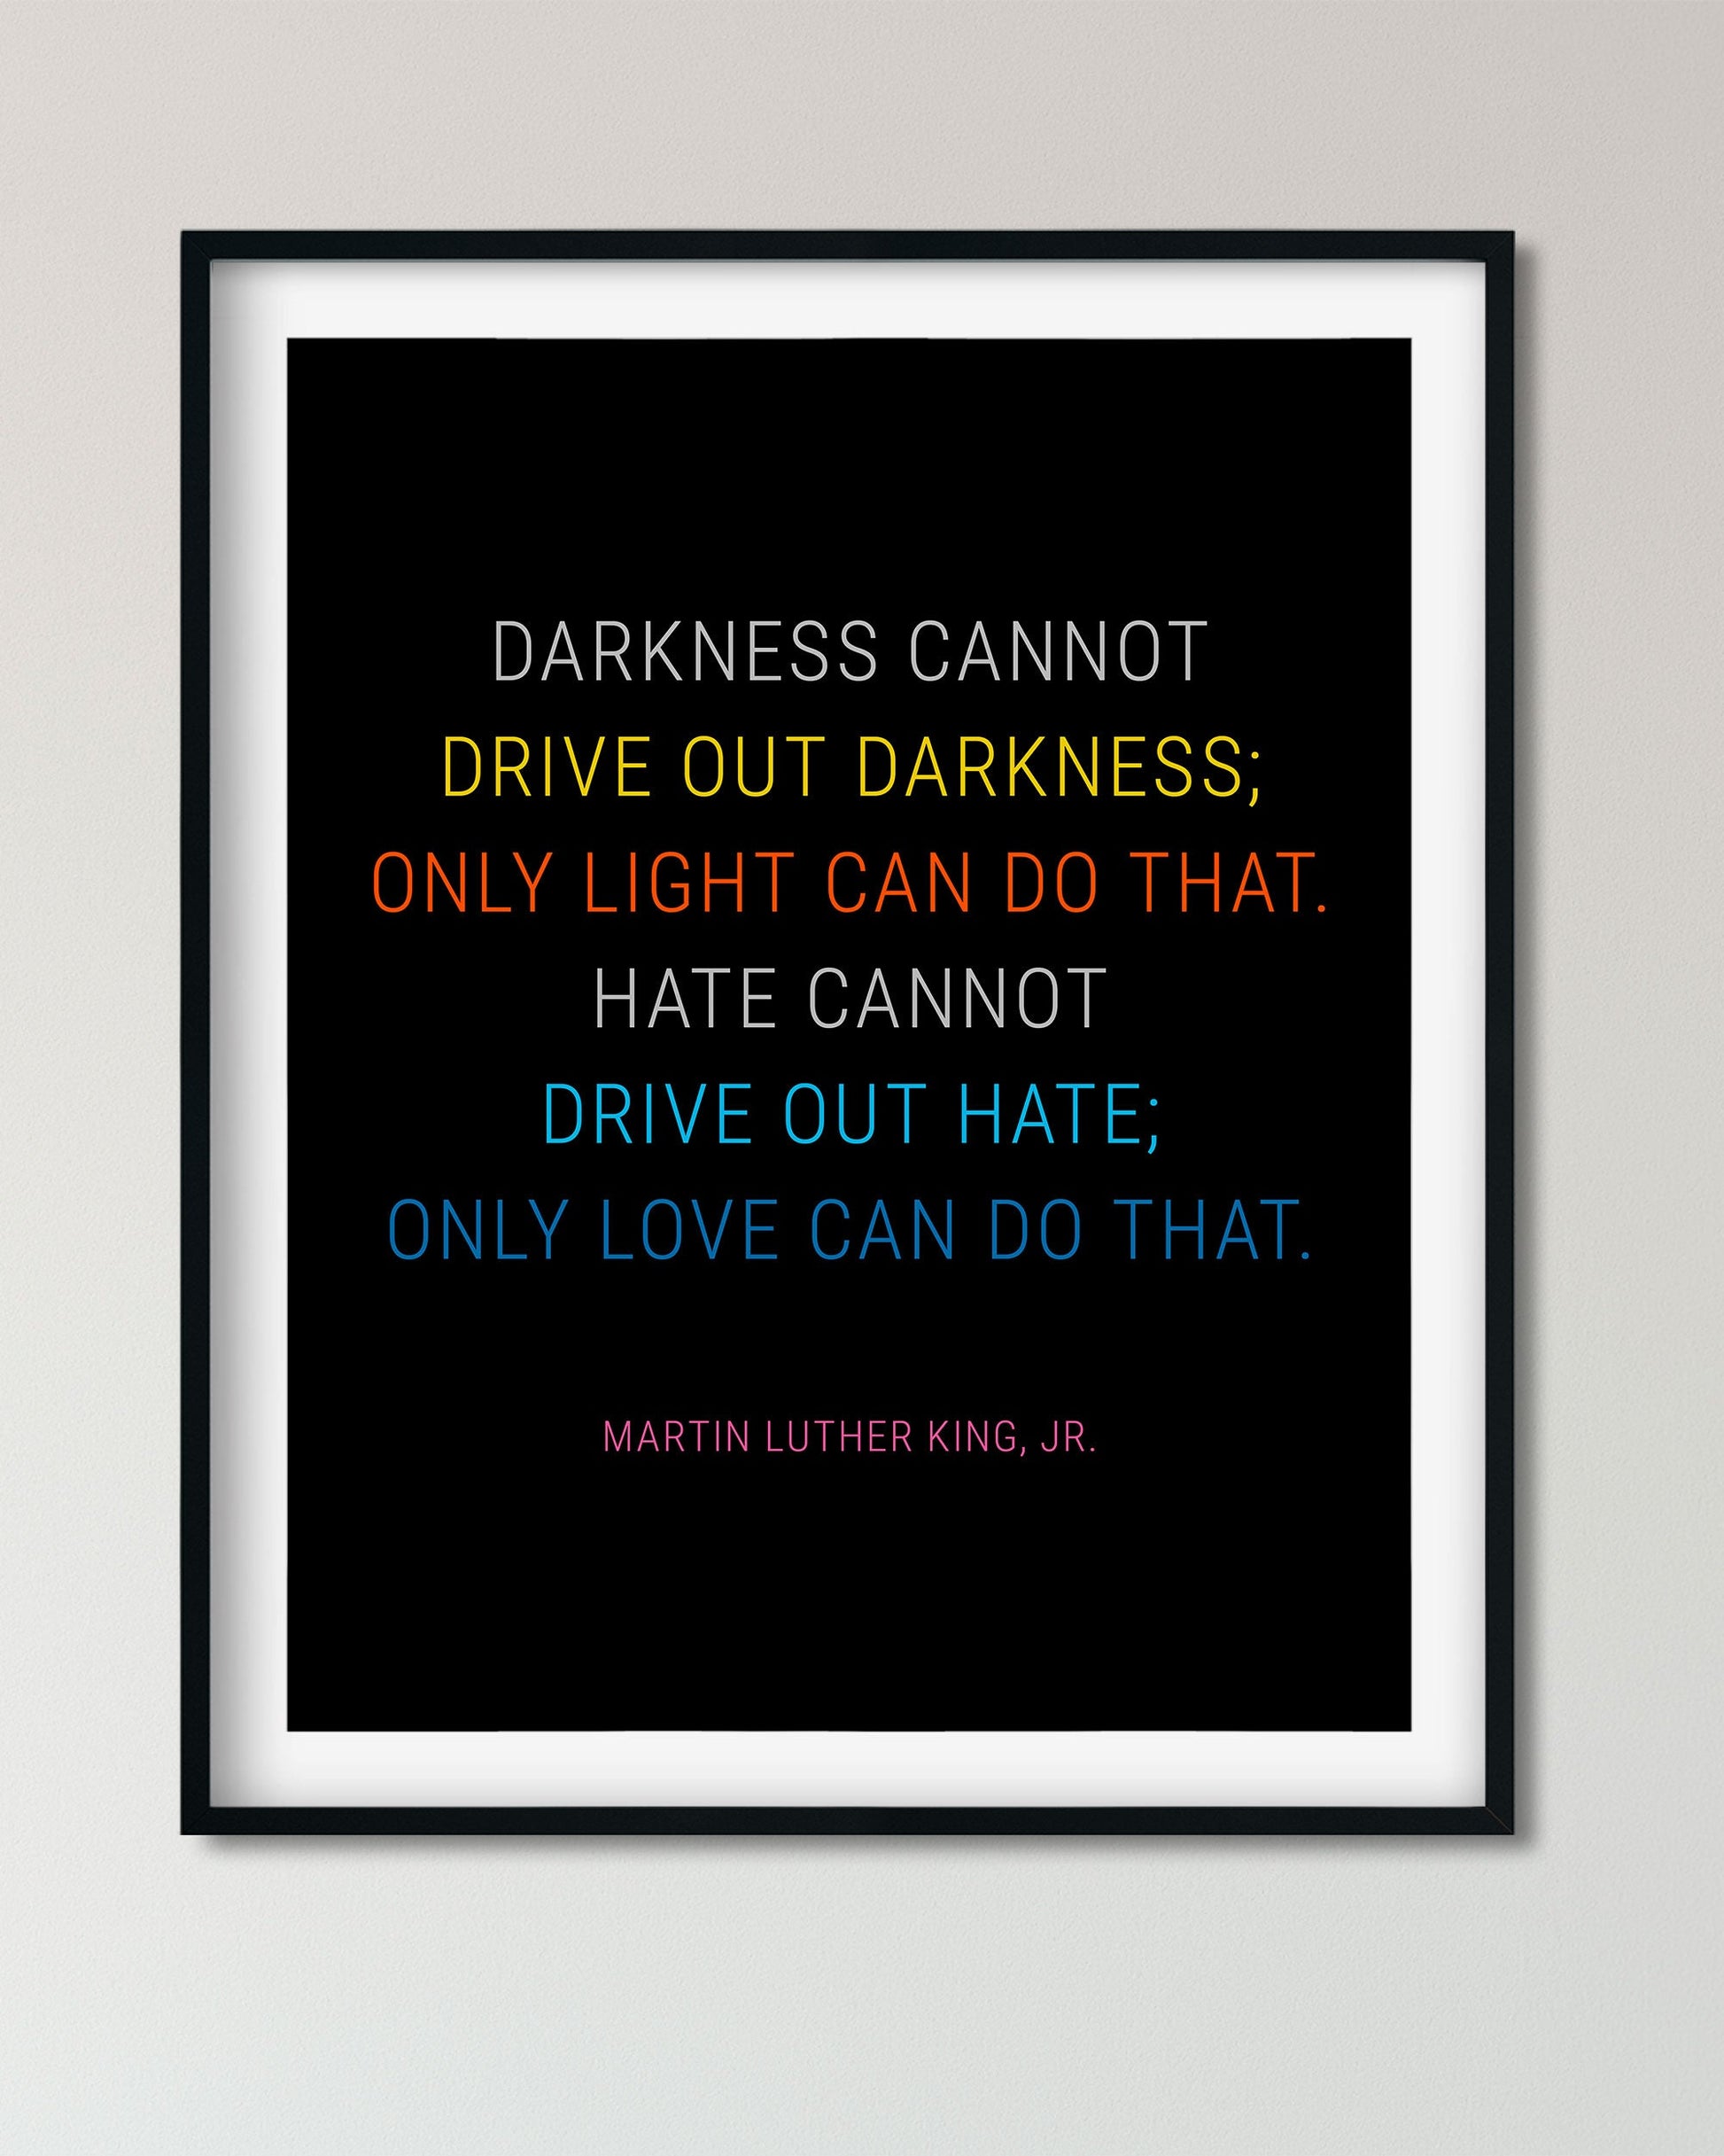 Dr. Martin Luther King, Jr. Quote - Only Love Can Do That Social Justice Poster Art - Transit Design